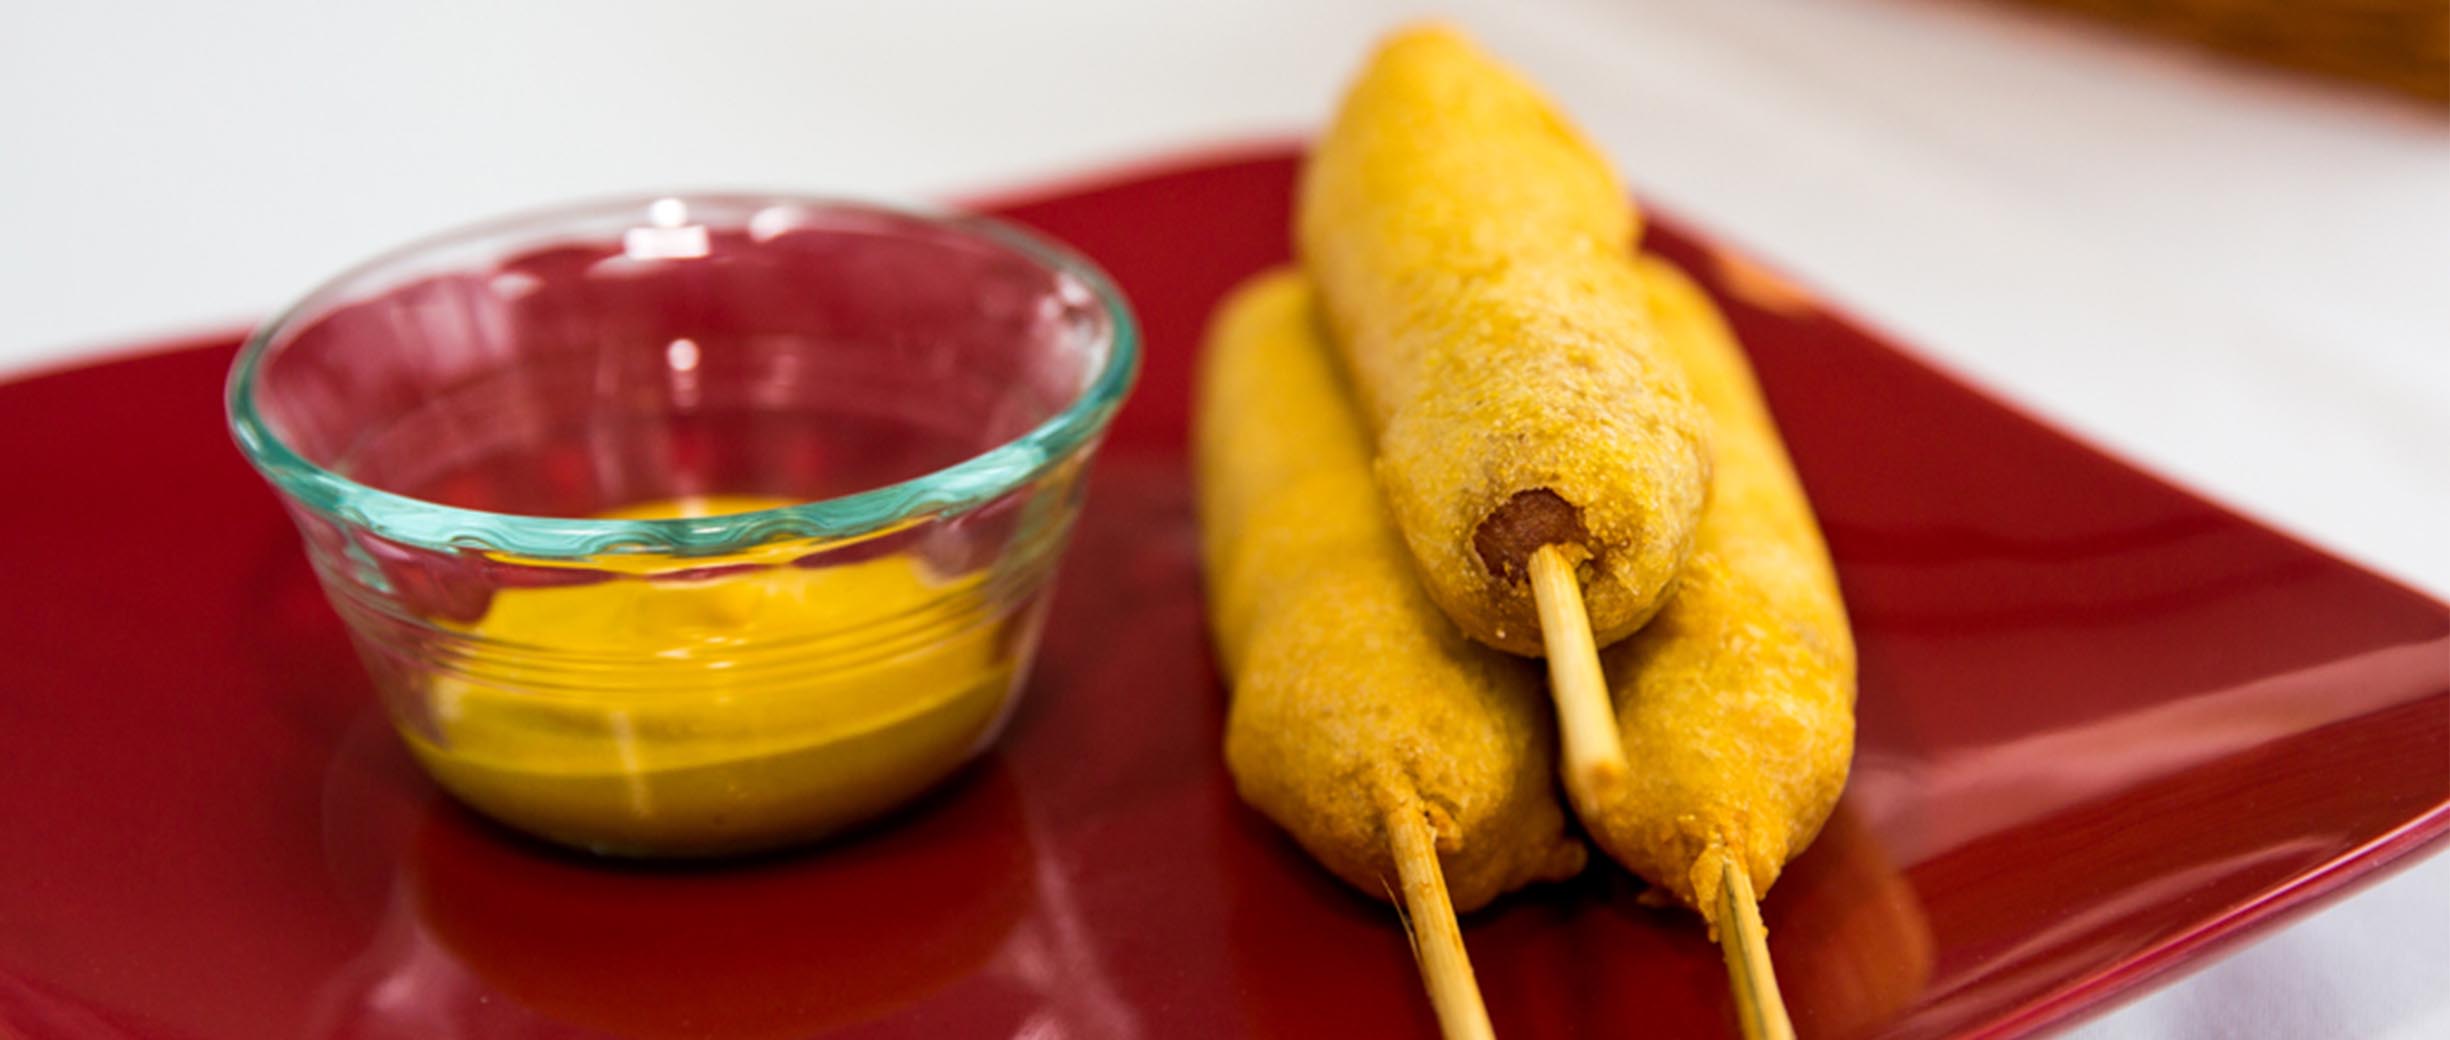 Chipotle and Roasted Red Pepper Corn Dog